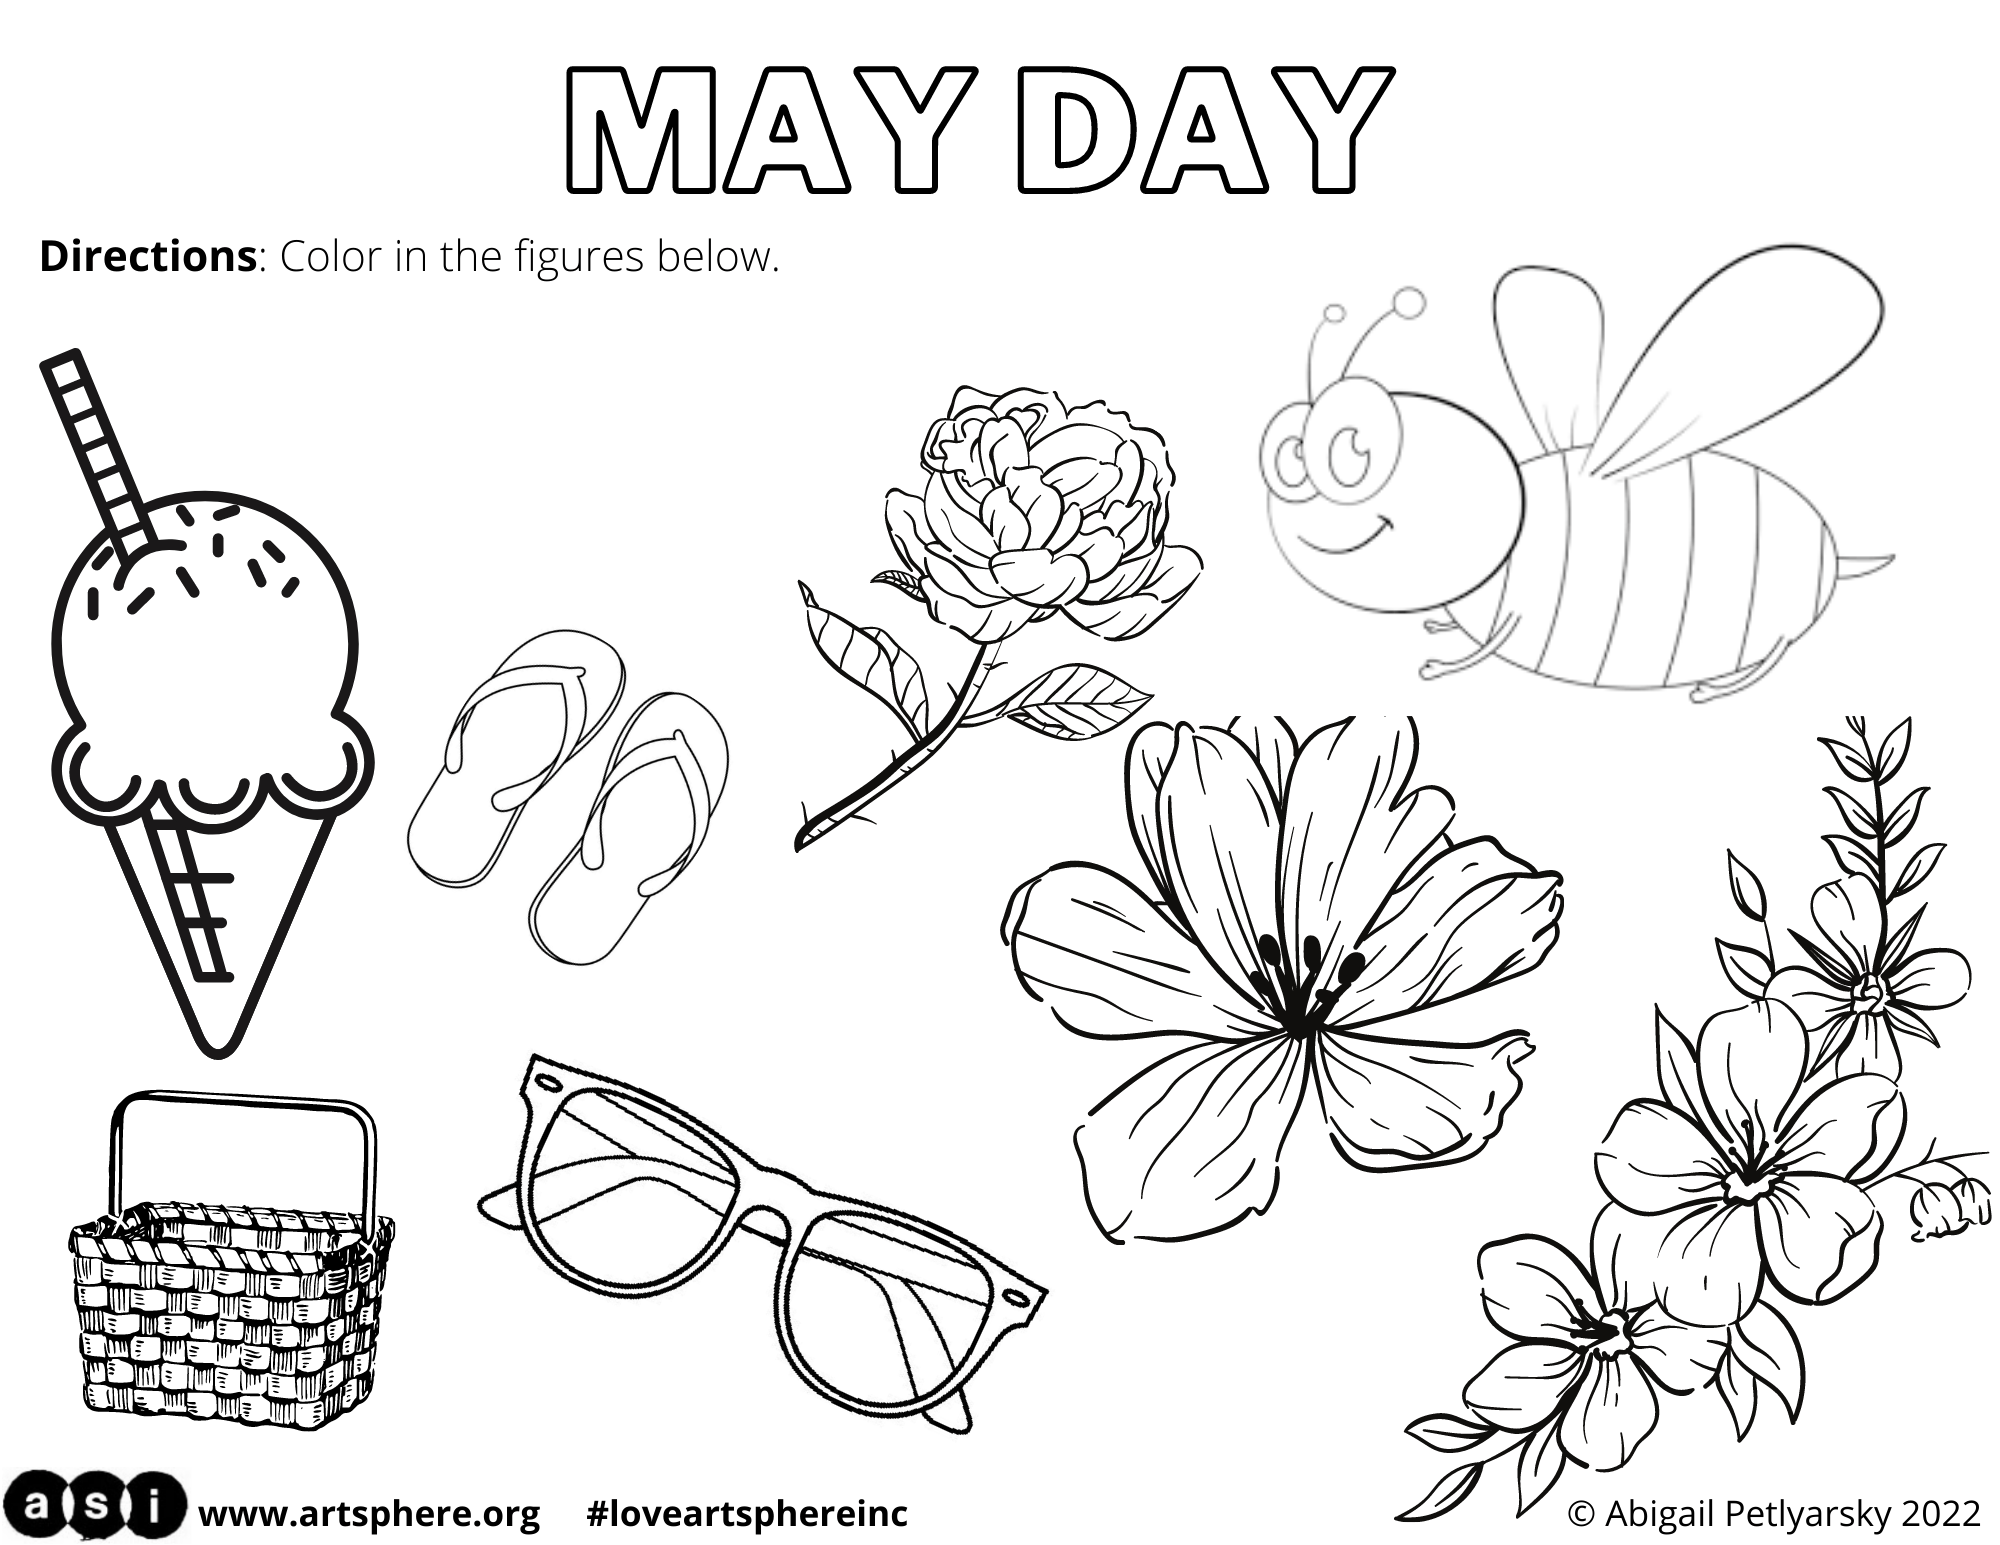 MAY DAY COLORING PAGE Art Sphere Inc.